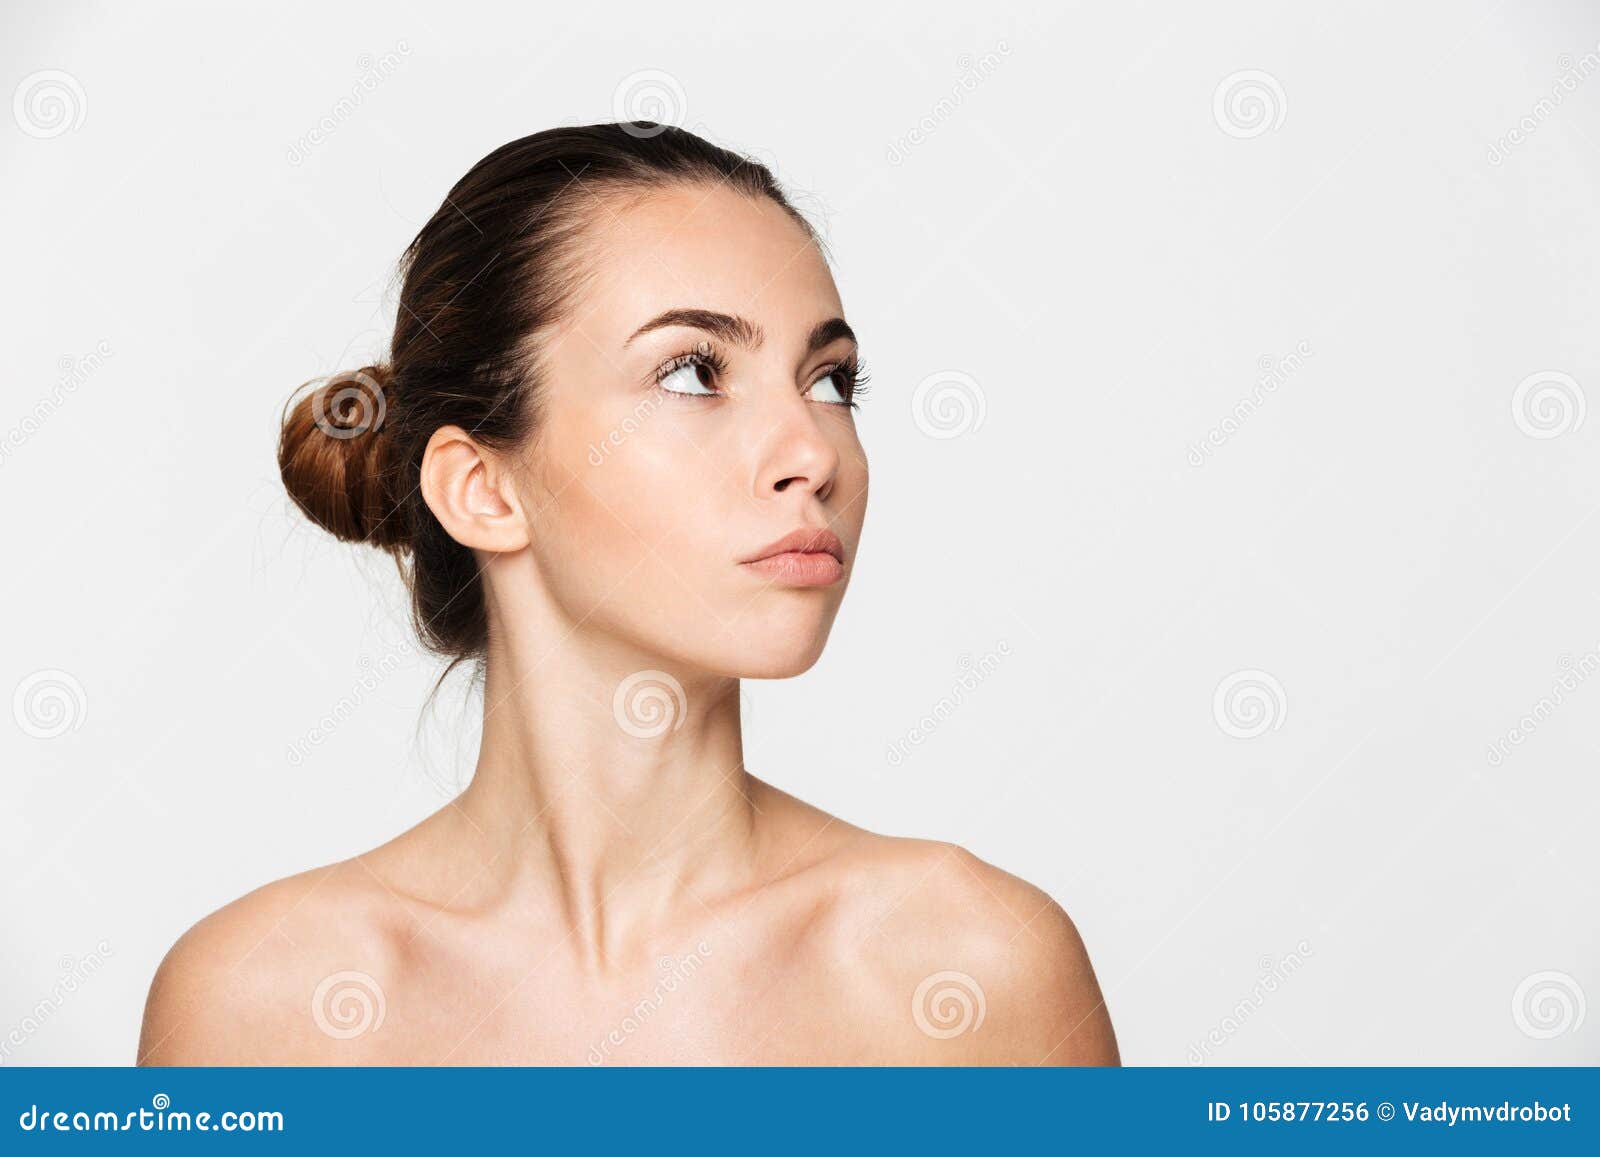 Beauty Portrait Of A Young Attractive Half Naked Woman 